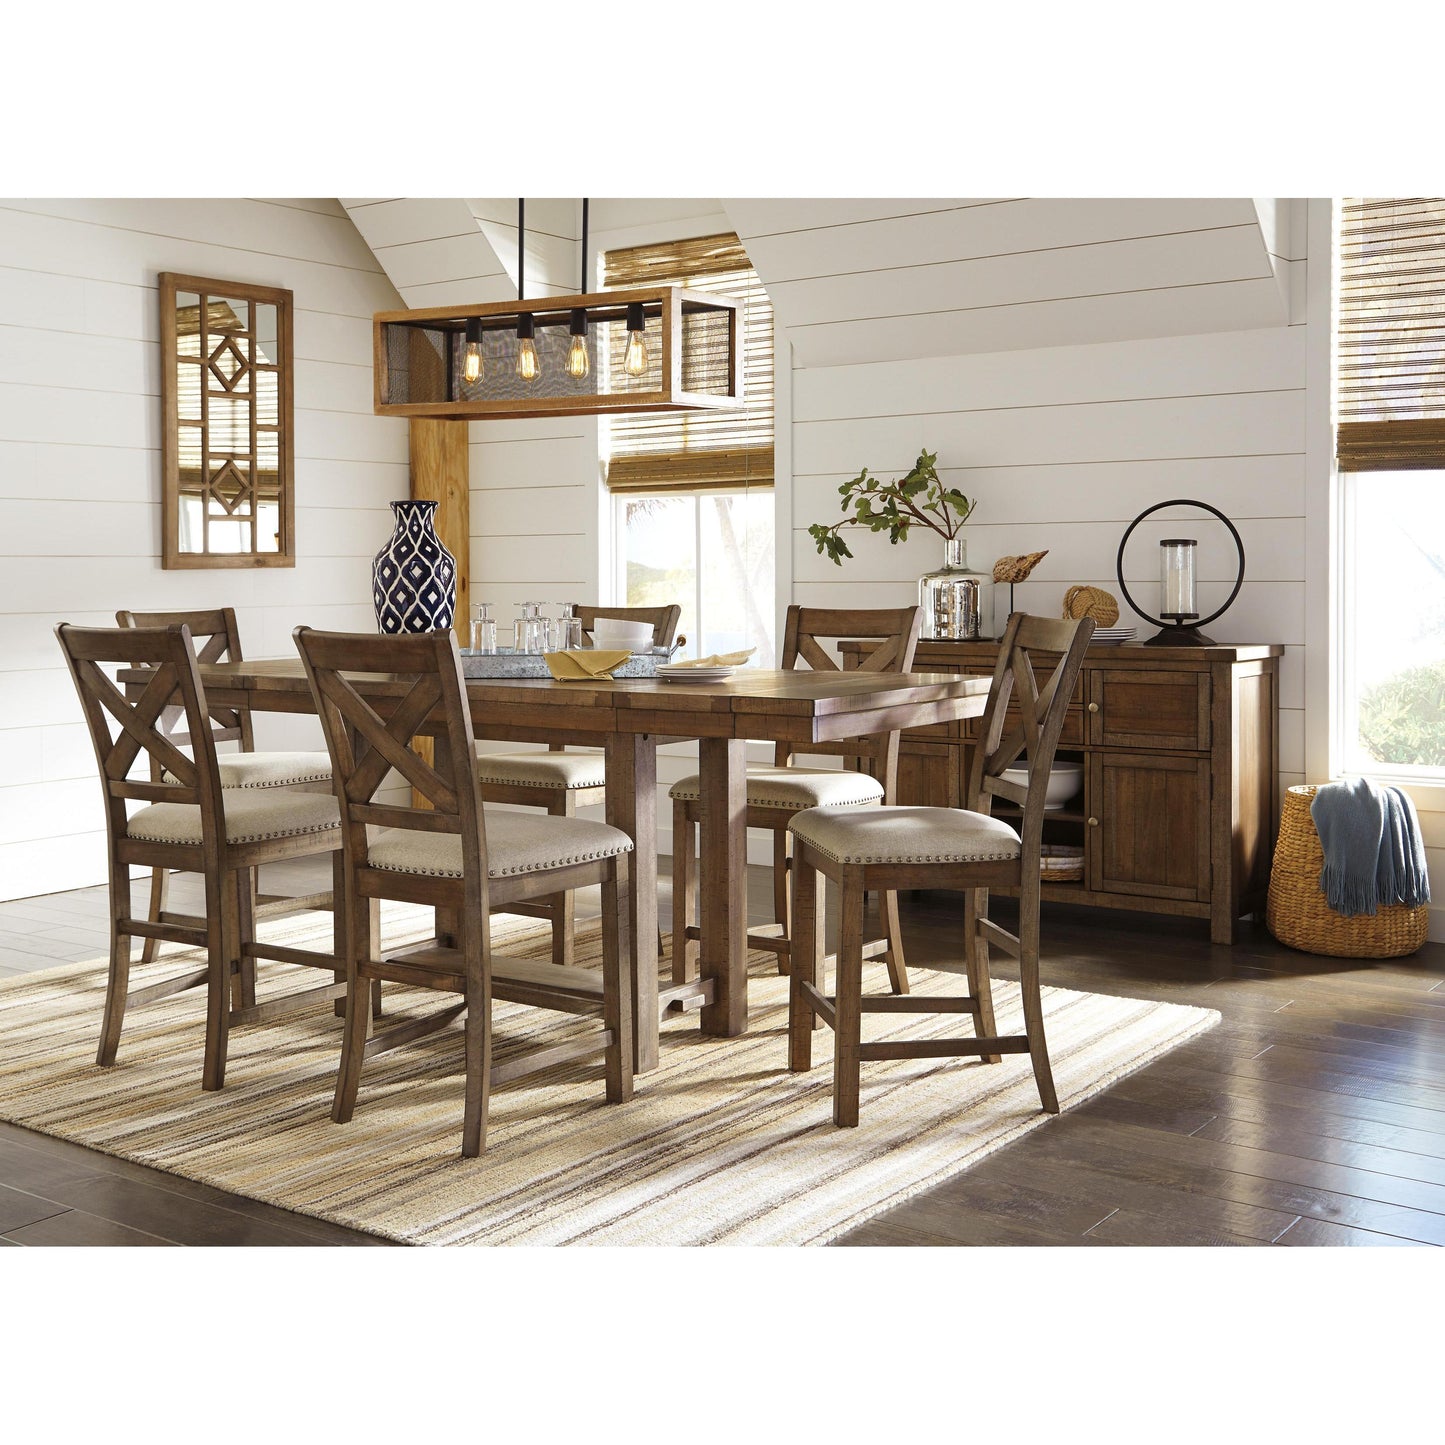 Signature Design by Ashley Moriville D631D10 7 pc Counter Height Dining Set IMAGE 1